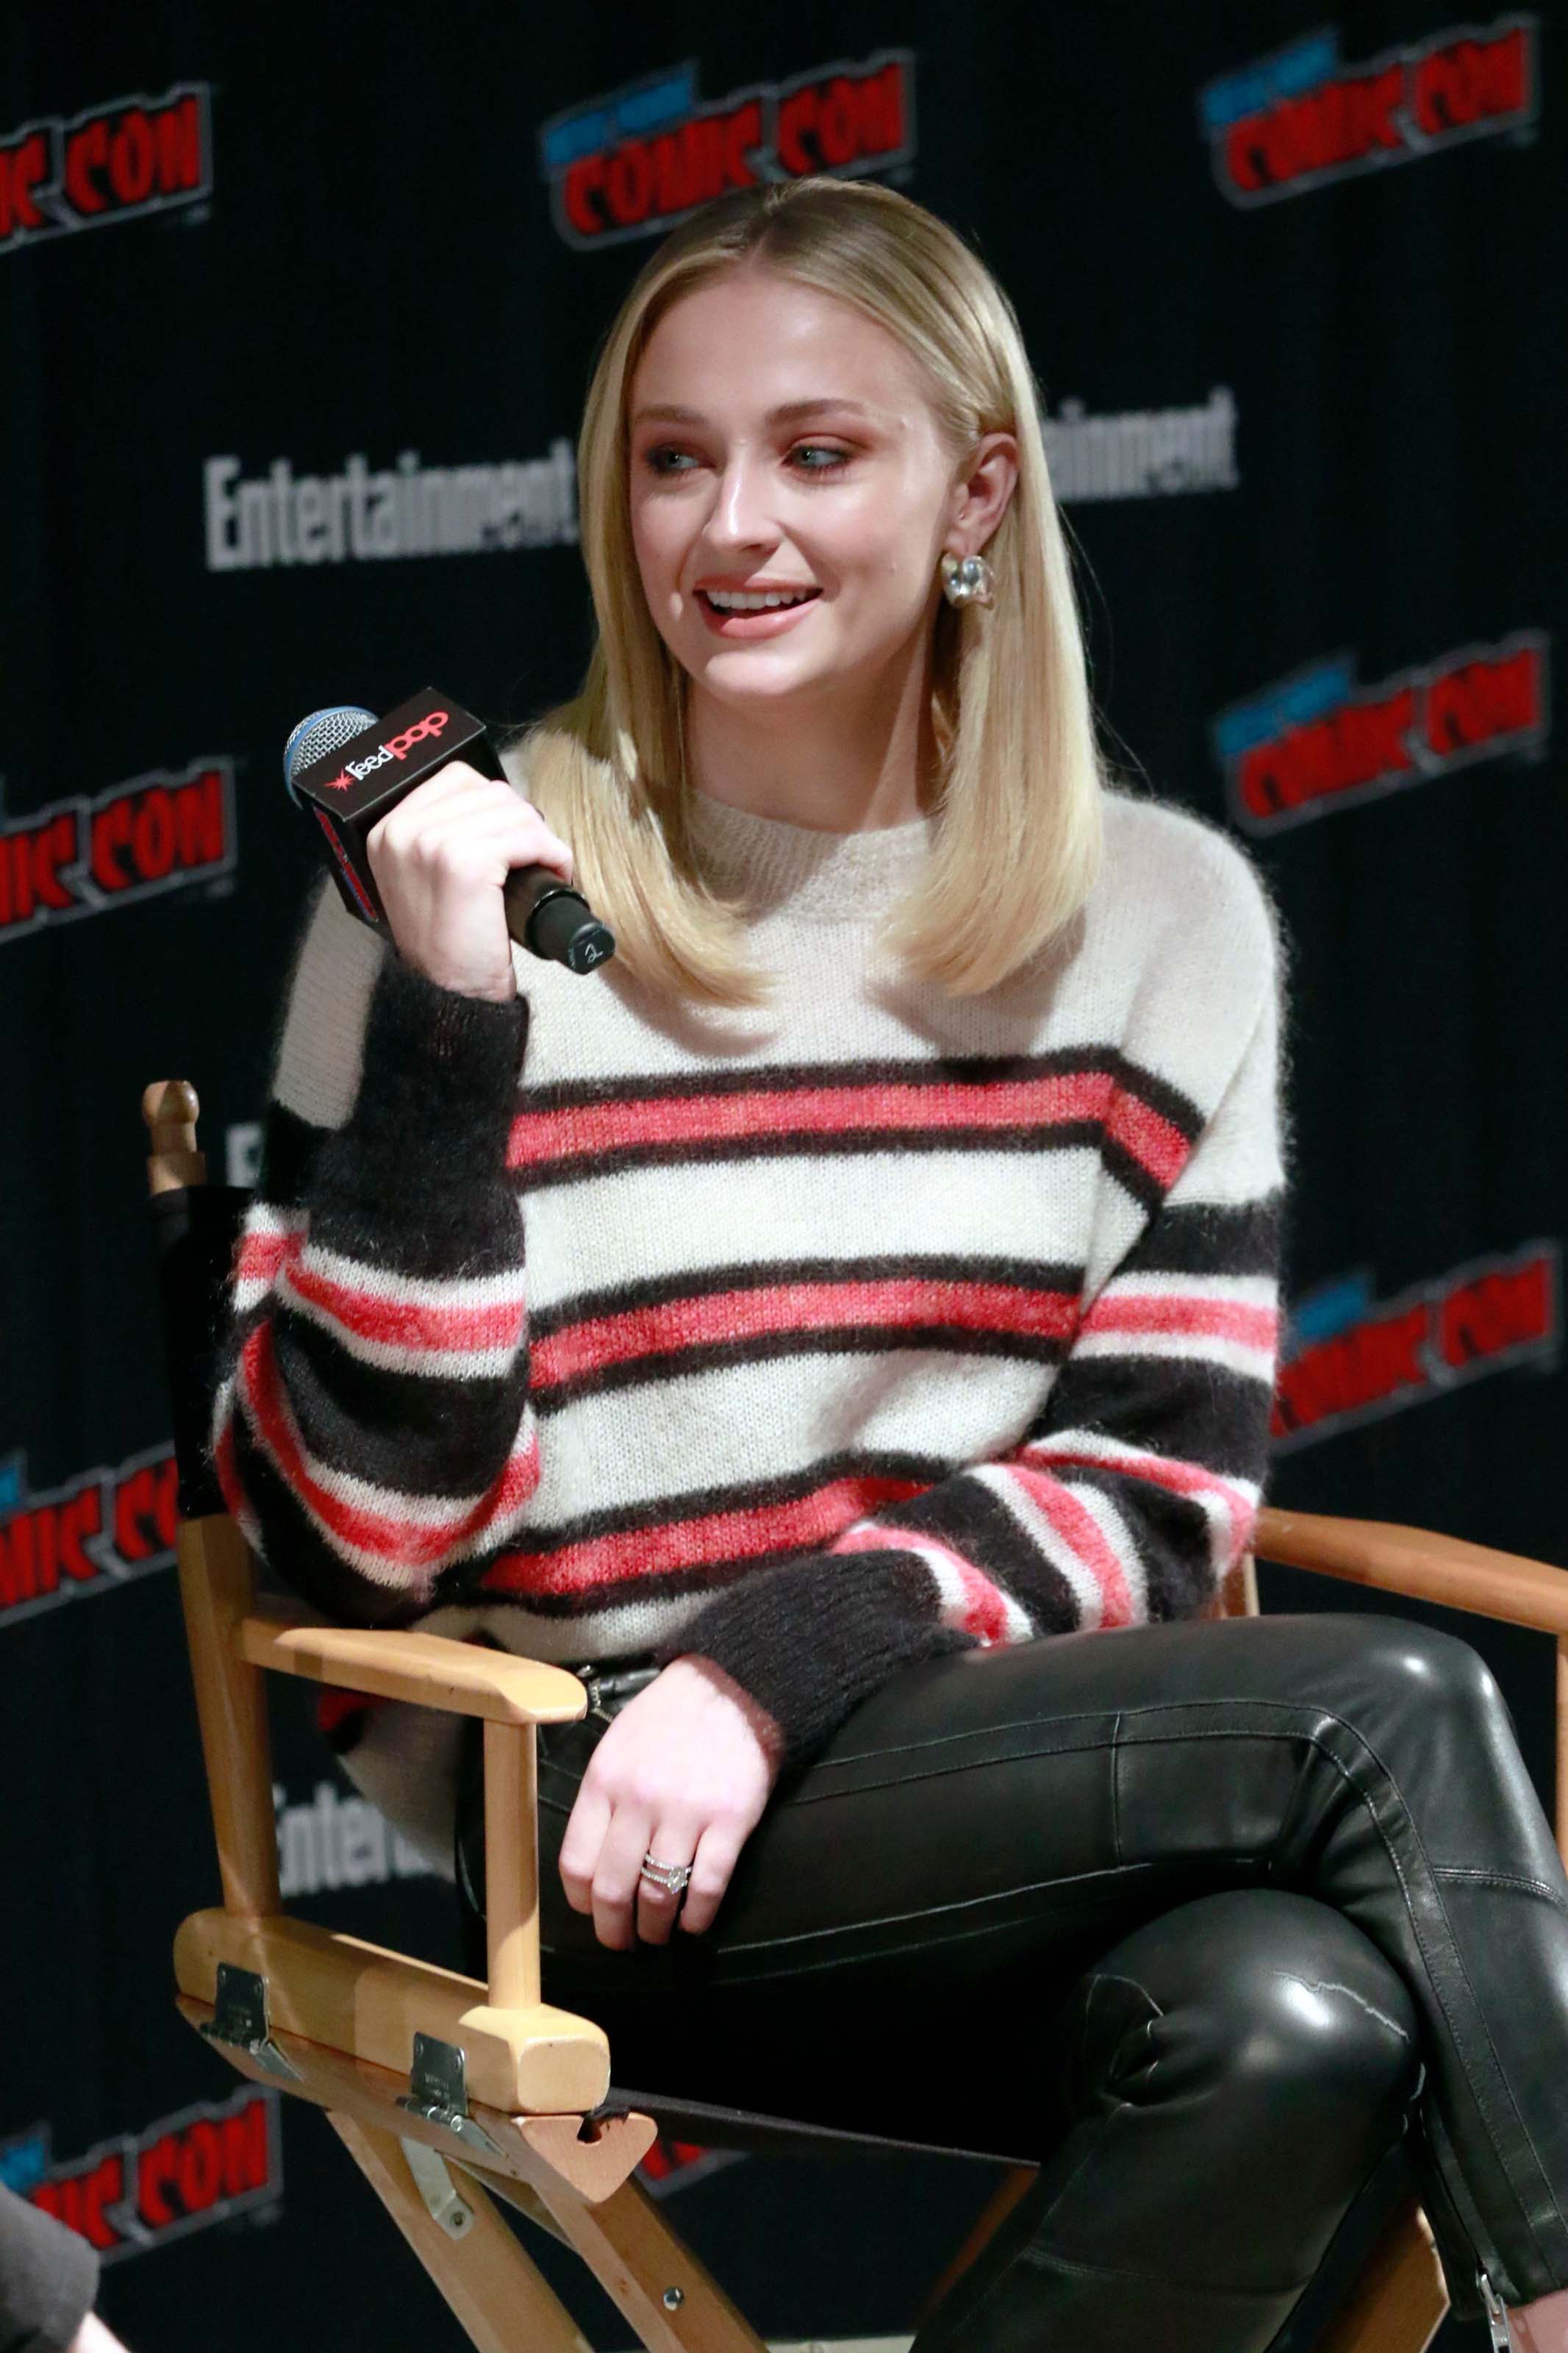 Sophie Turner attends Entertainment Weekly’s panel